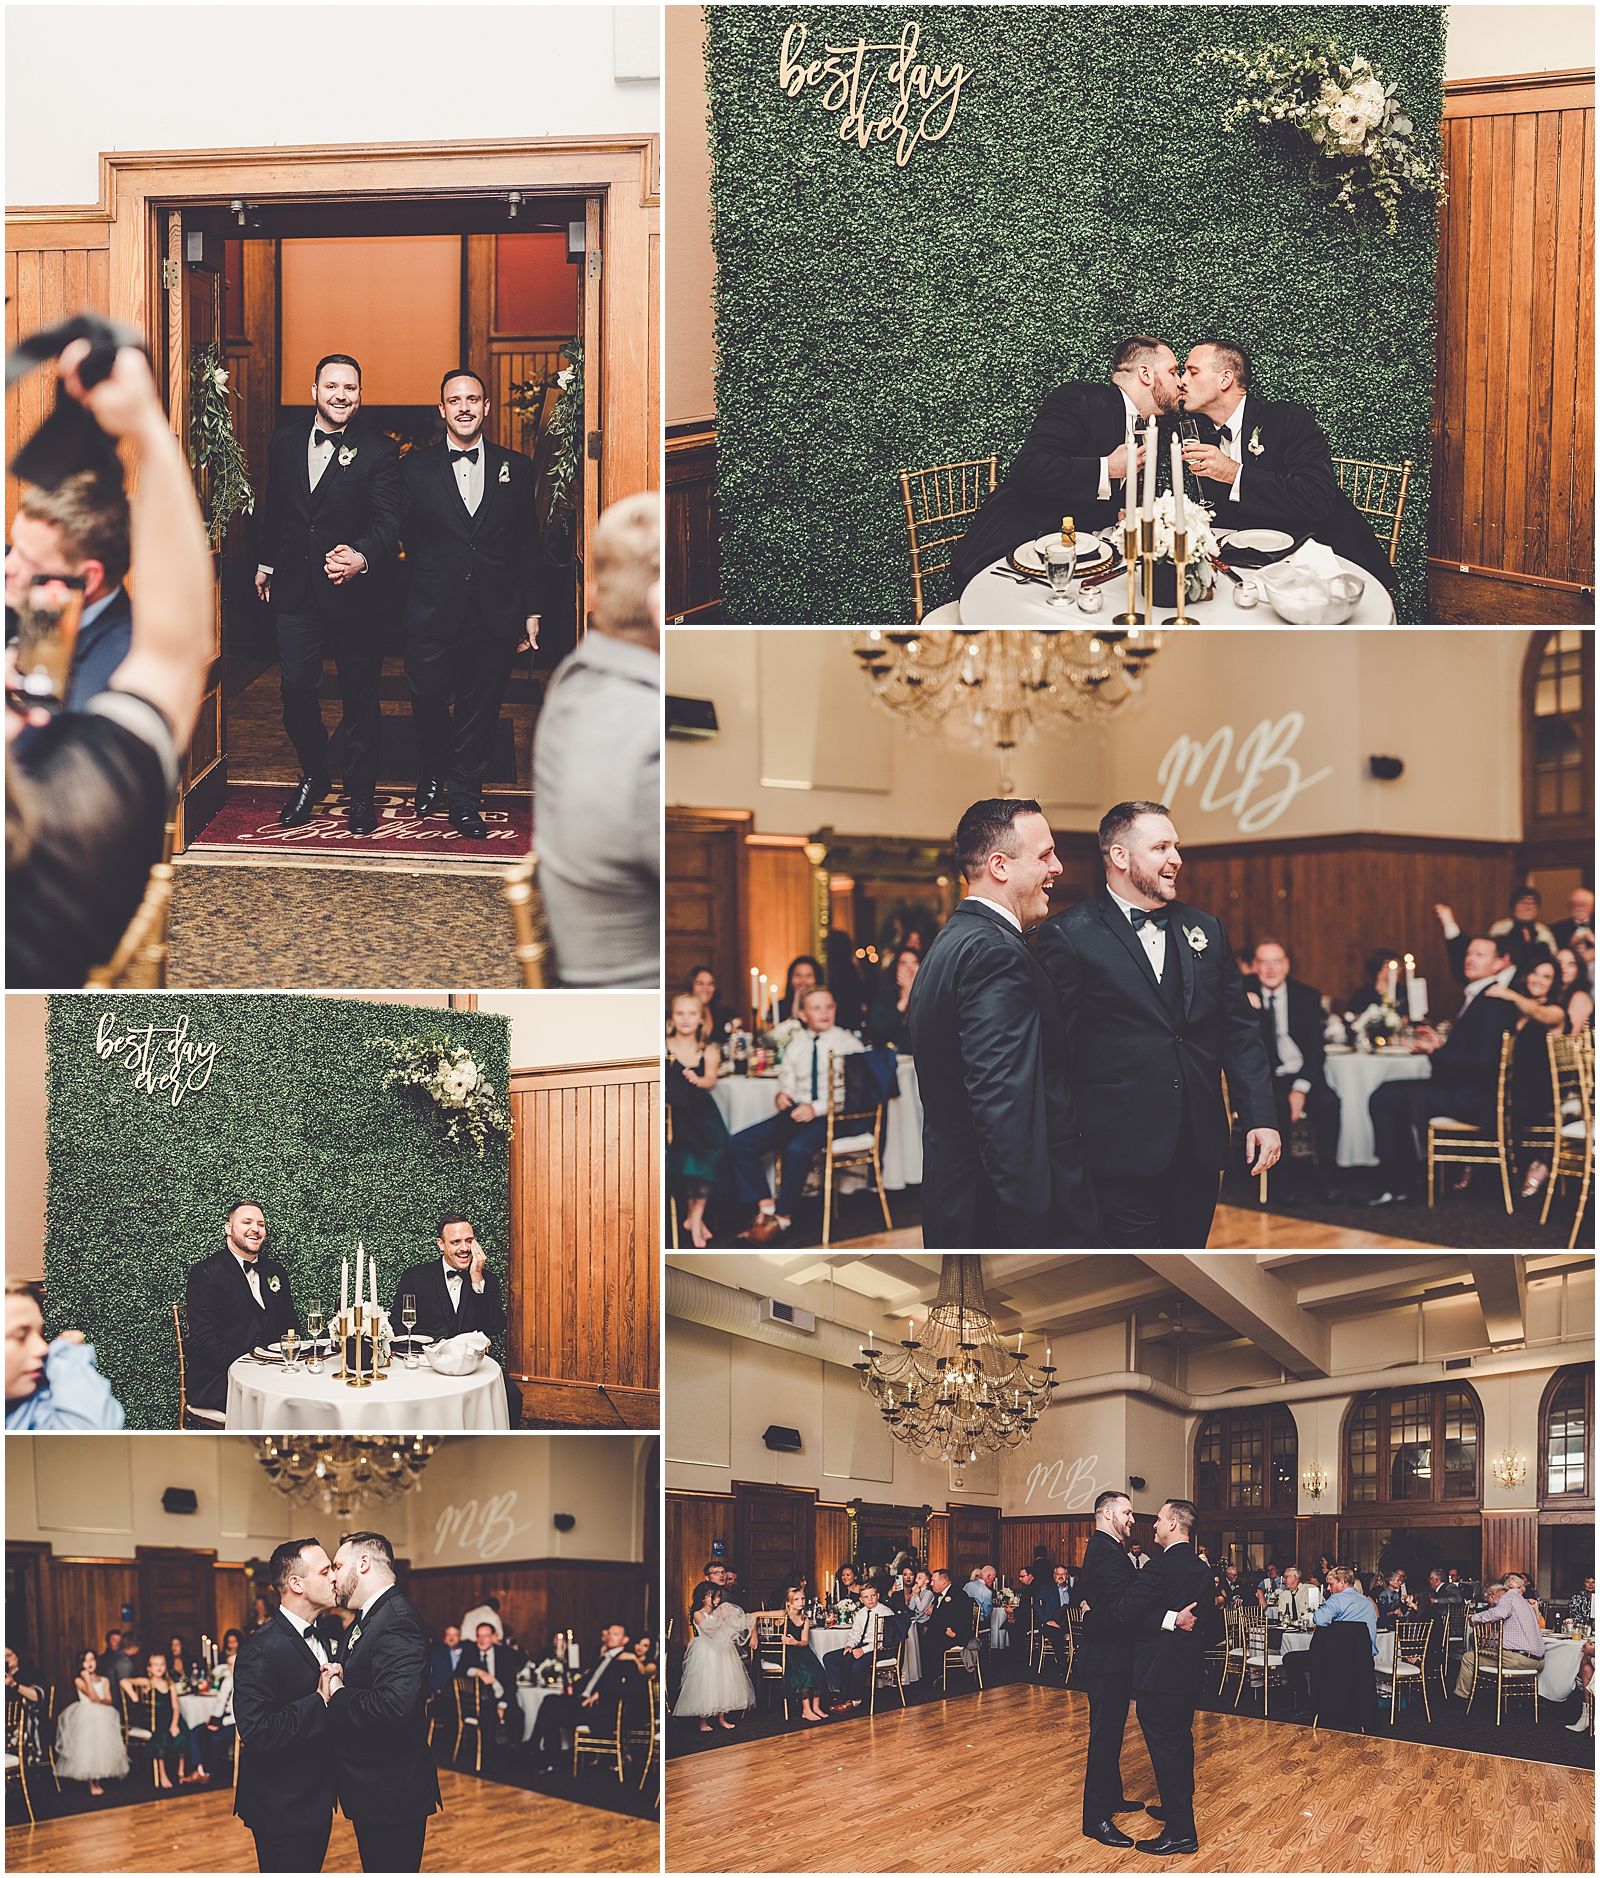 Ben and Michael's fall wedding at the Post House Ballroom in Dixon, Illinois with Chicagoland wedding photographer Kara Evans Photographer.